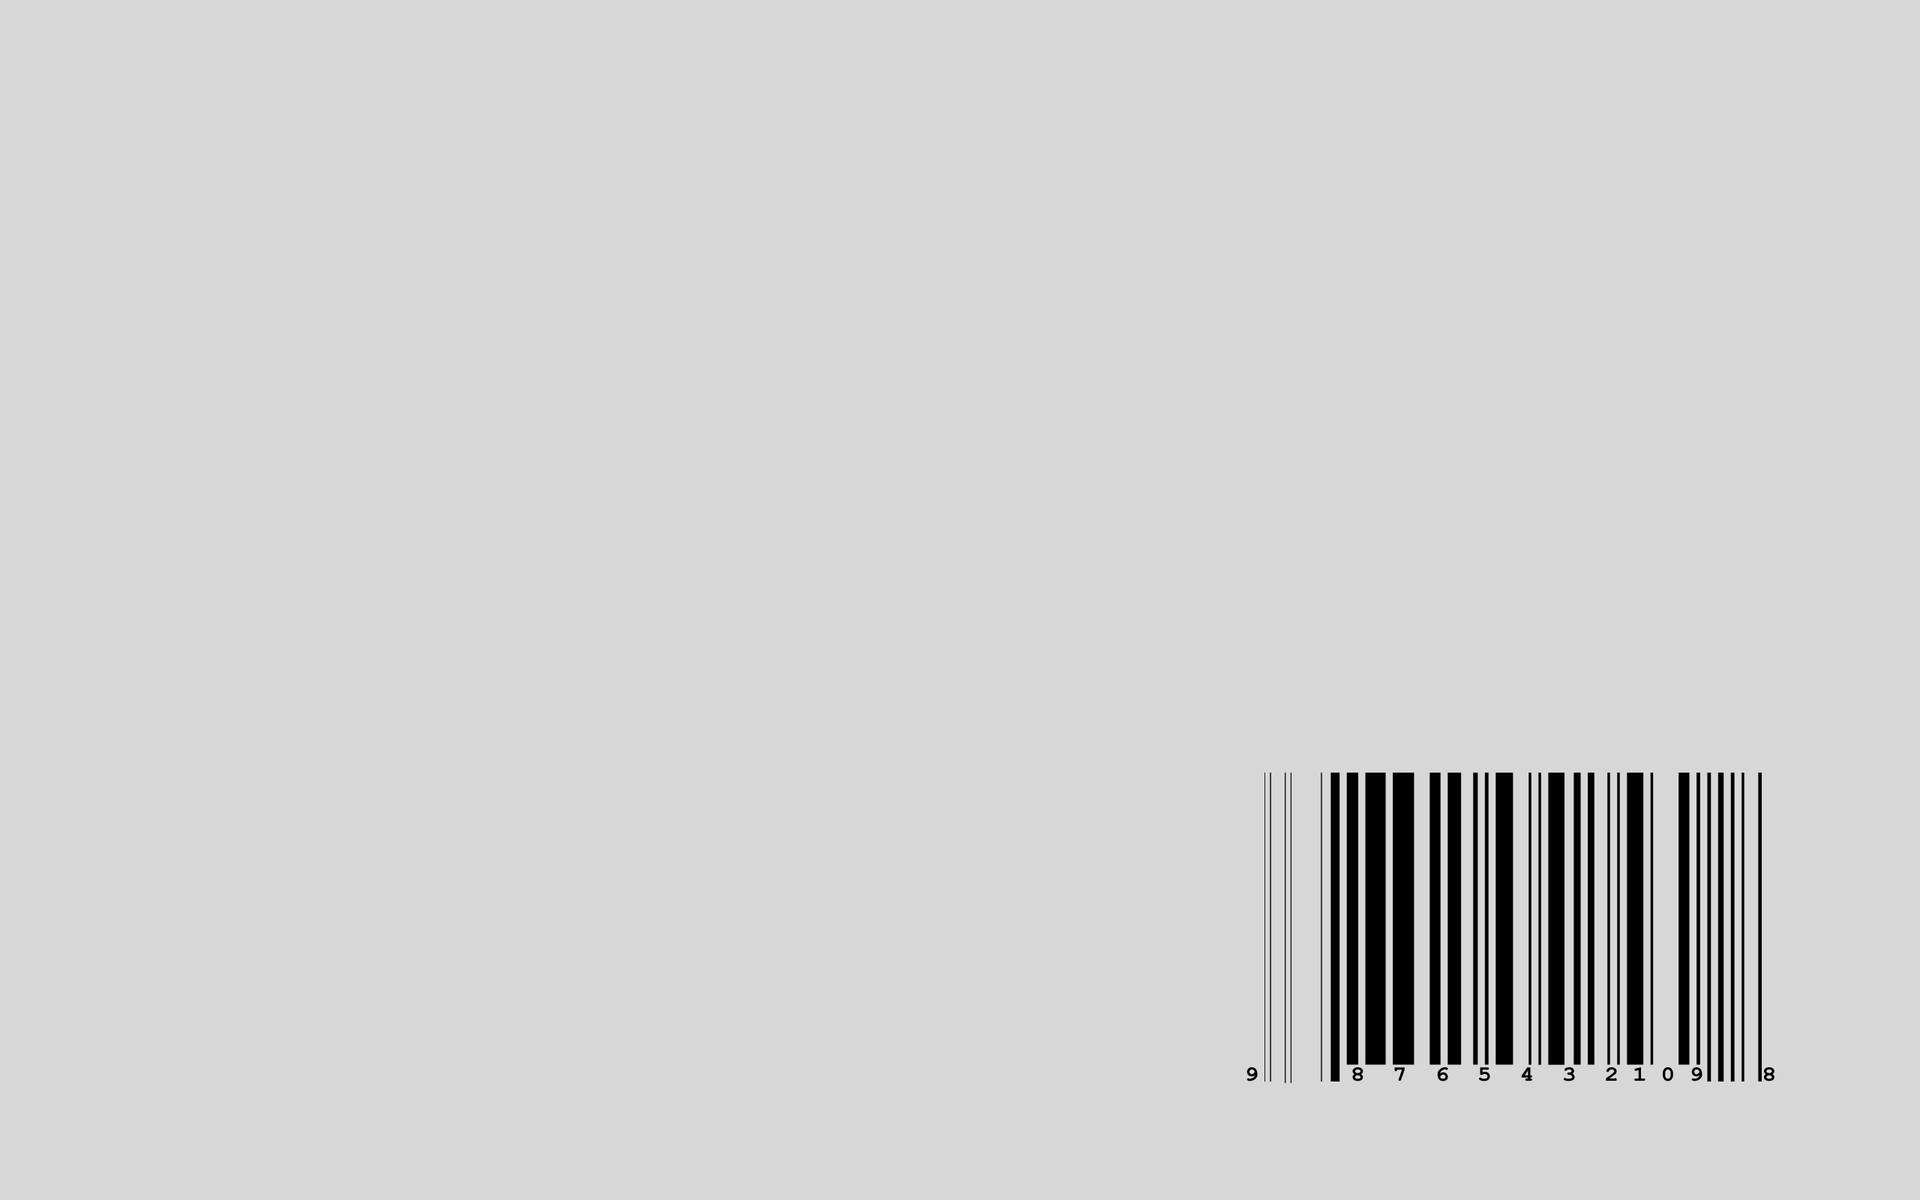 Simple Aesthetic Barcode Background